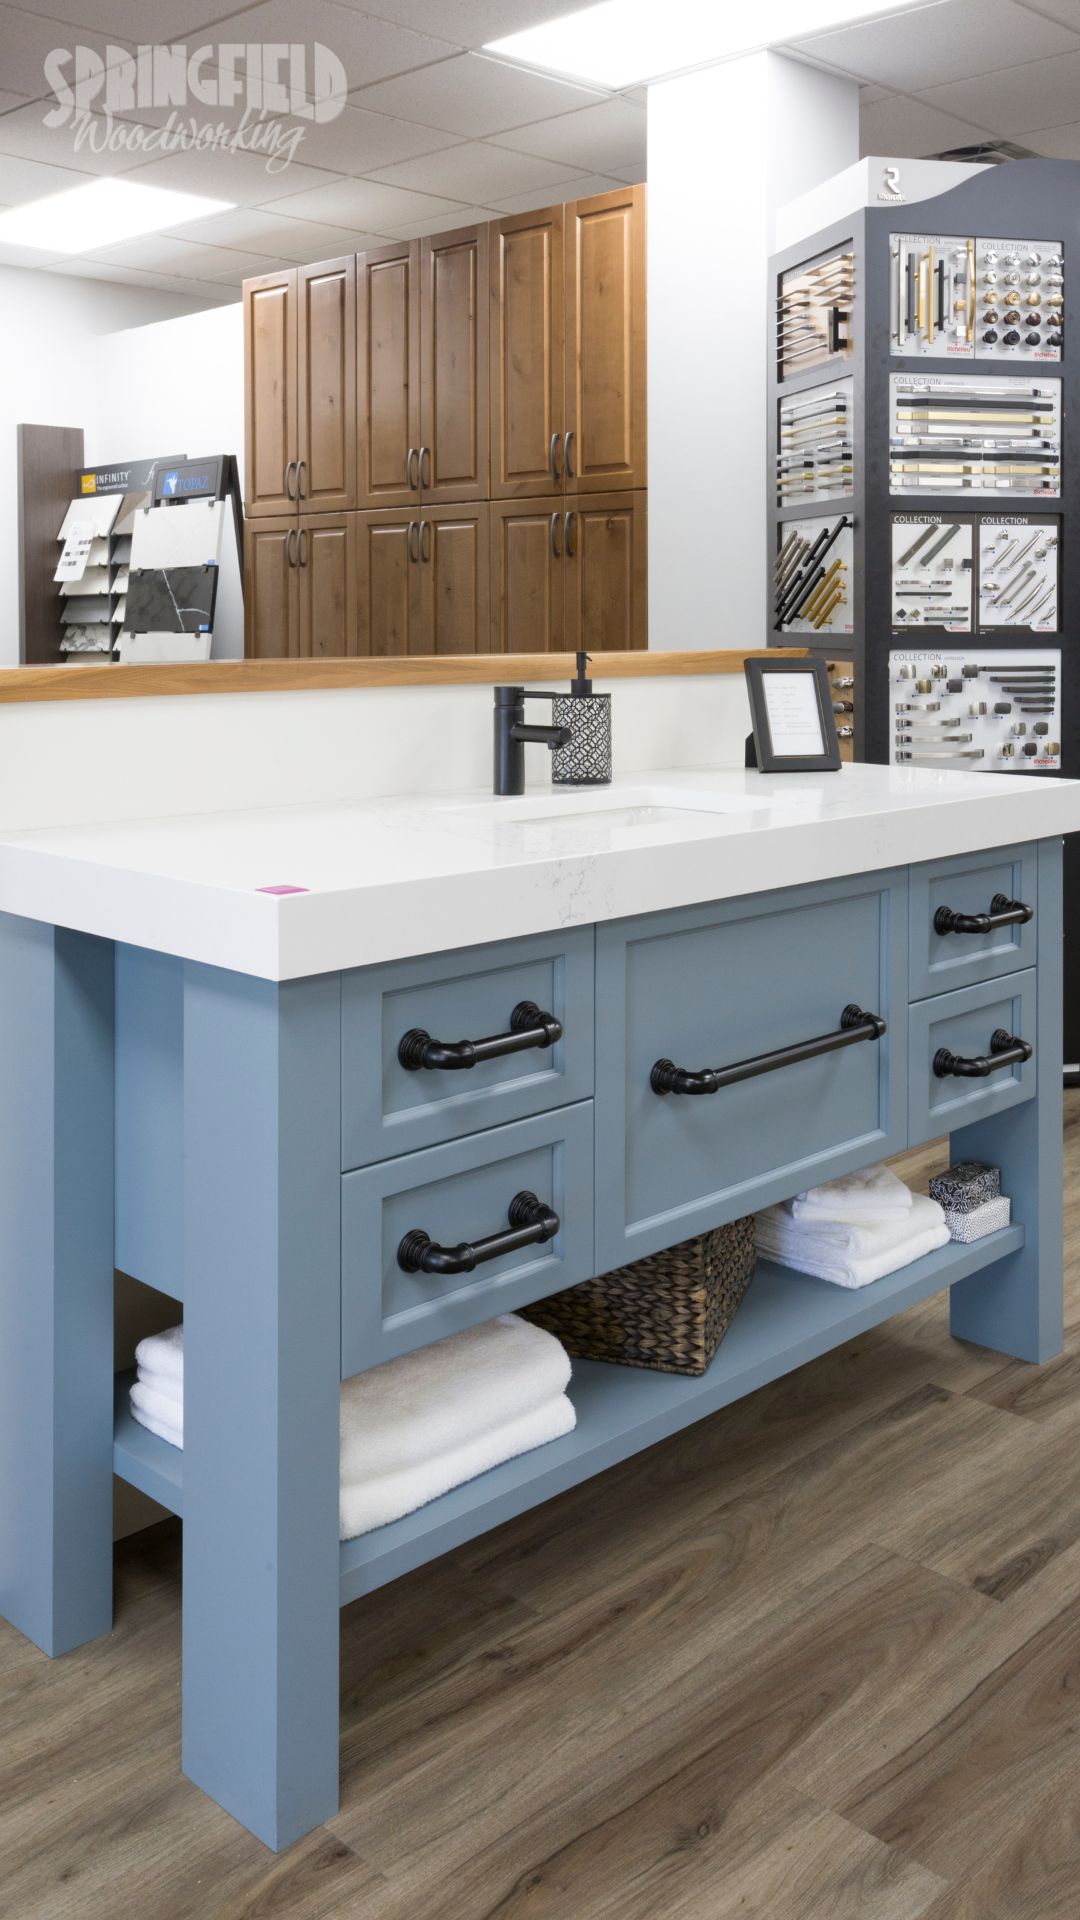 Pastel vanity, blue cabinets, custom cabinetry, bathroom cabinetry, sky blue